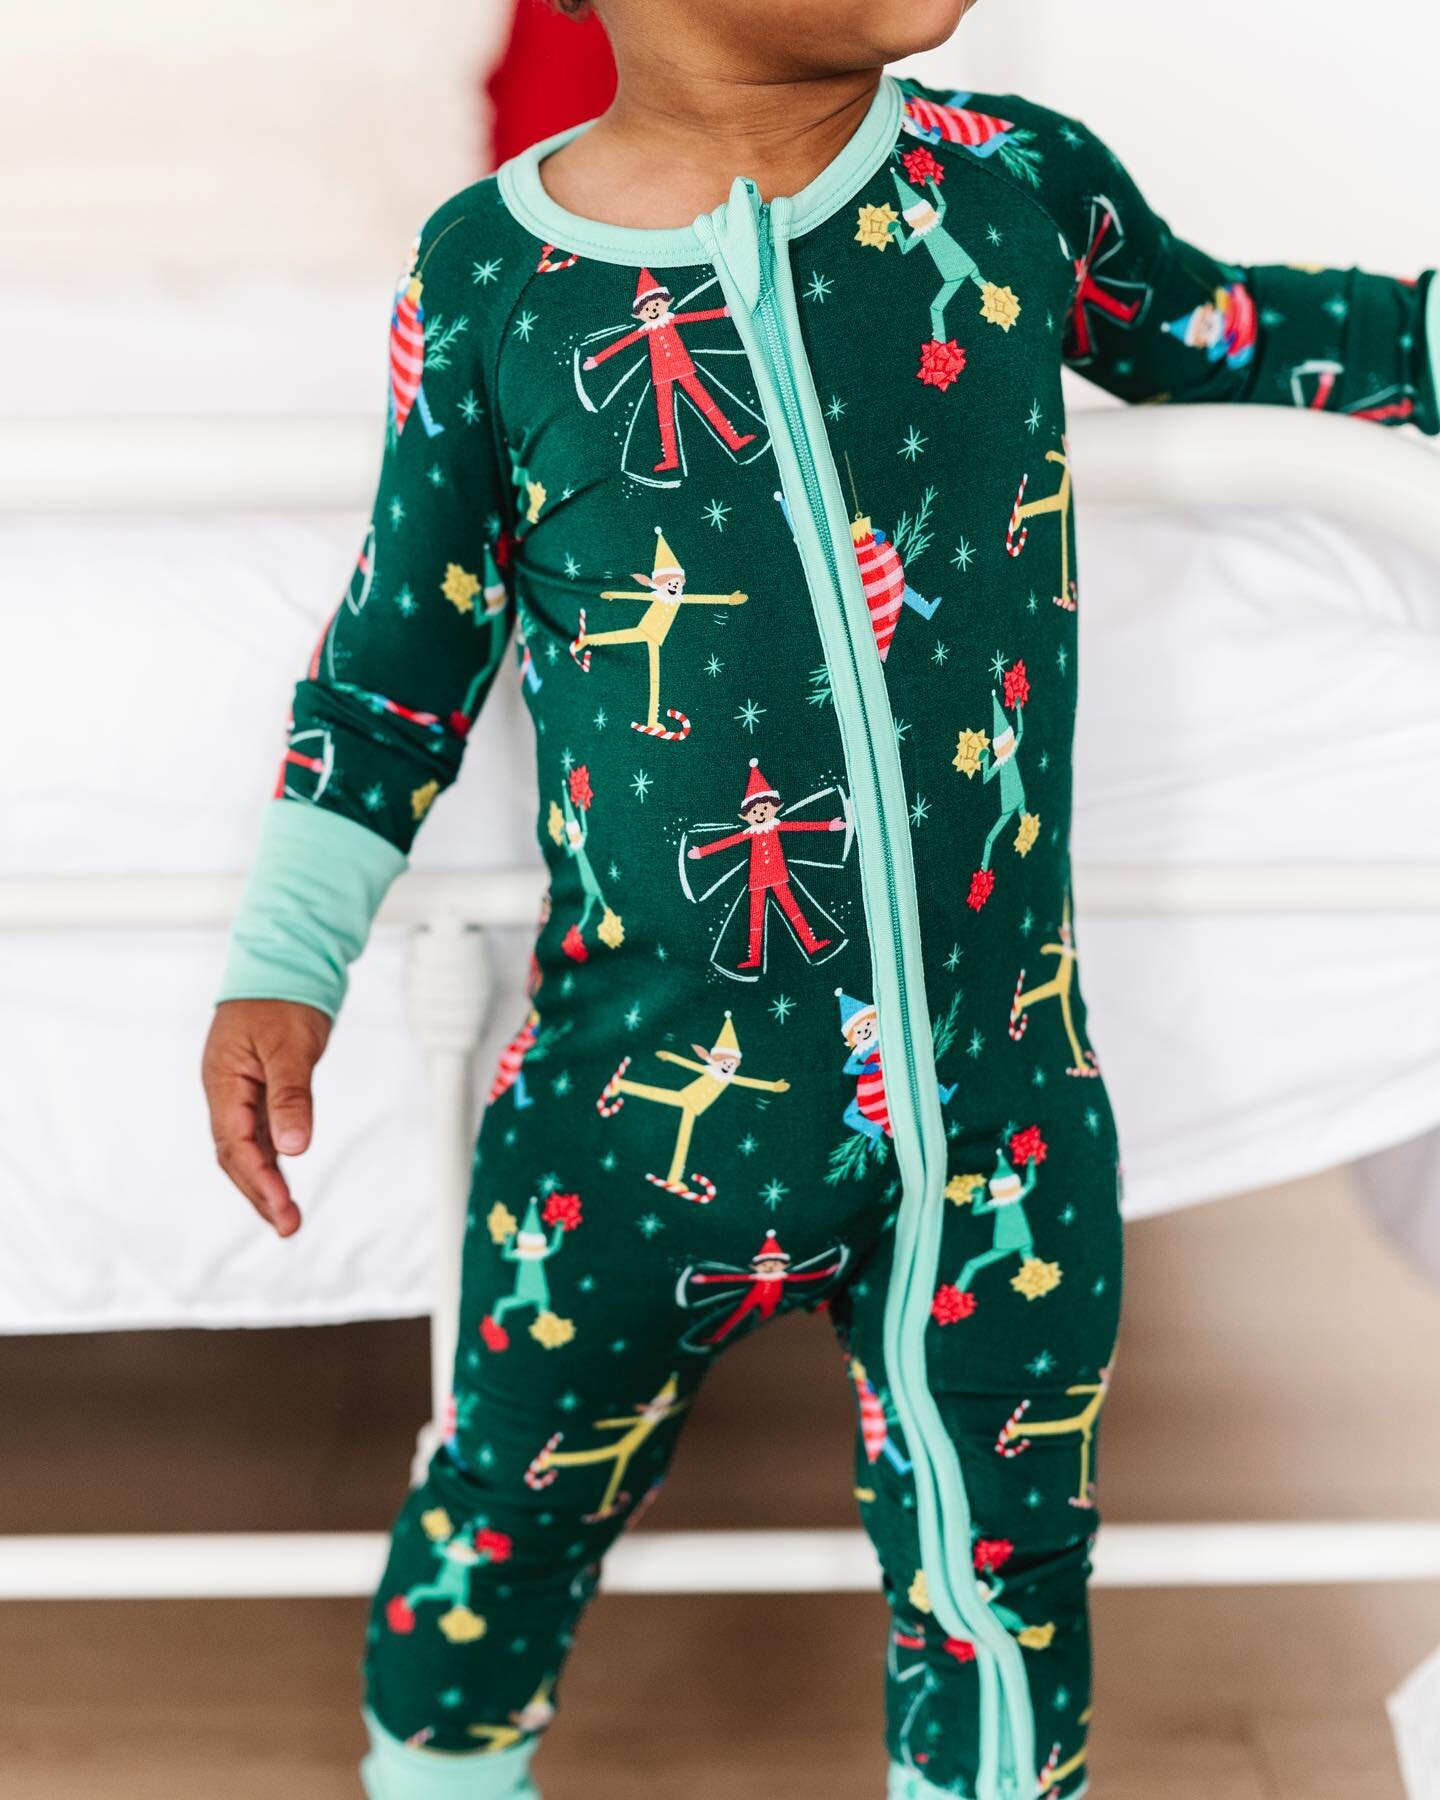 SNEAK PEEK!! It's official &ndash; my new Christmas pattern with @kikiandluluco baby/toddler pajamas is launching on Wednesday, October 18th! I'll share more details with you closer to the launch date but how cute are these little mischievous elves??